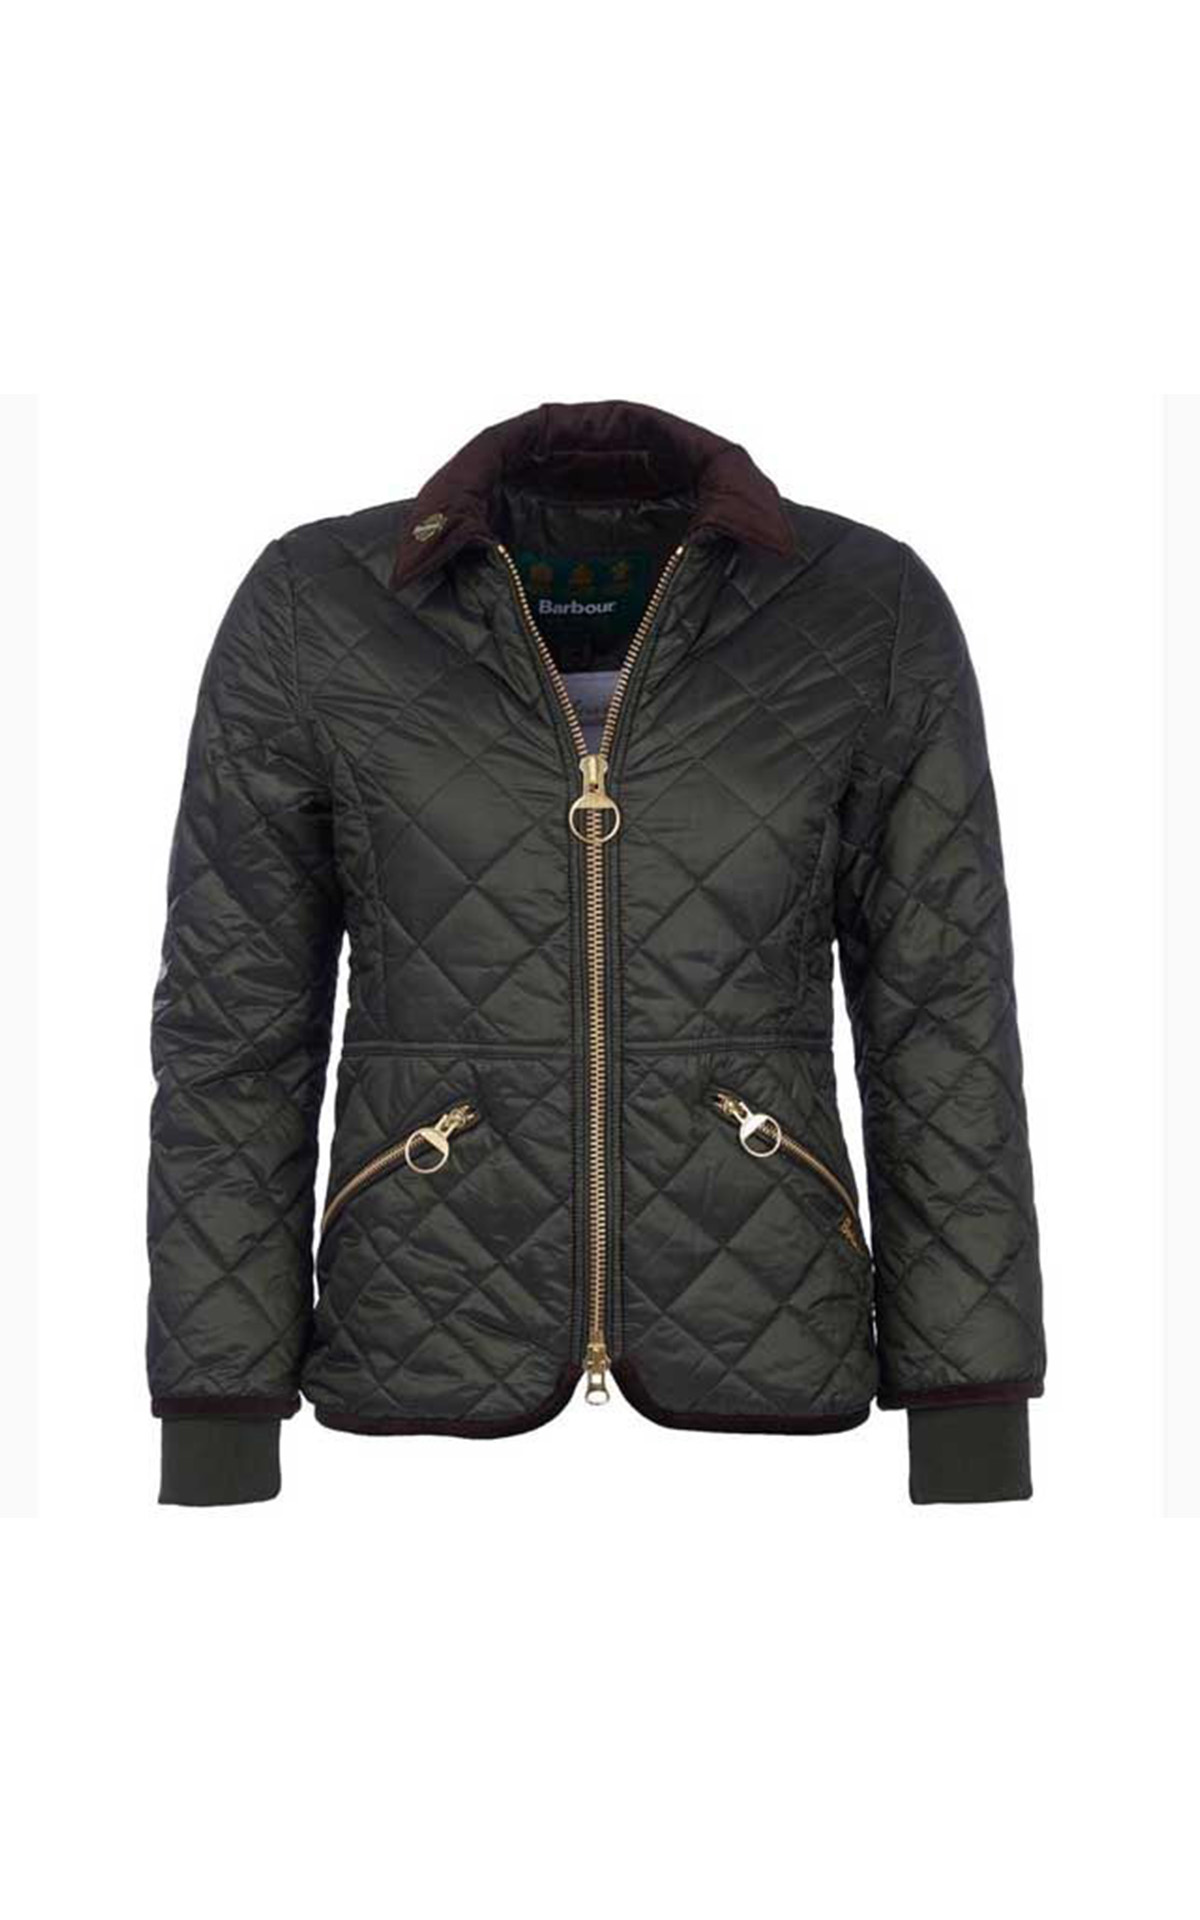 barbour suppliers near me